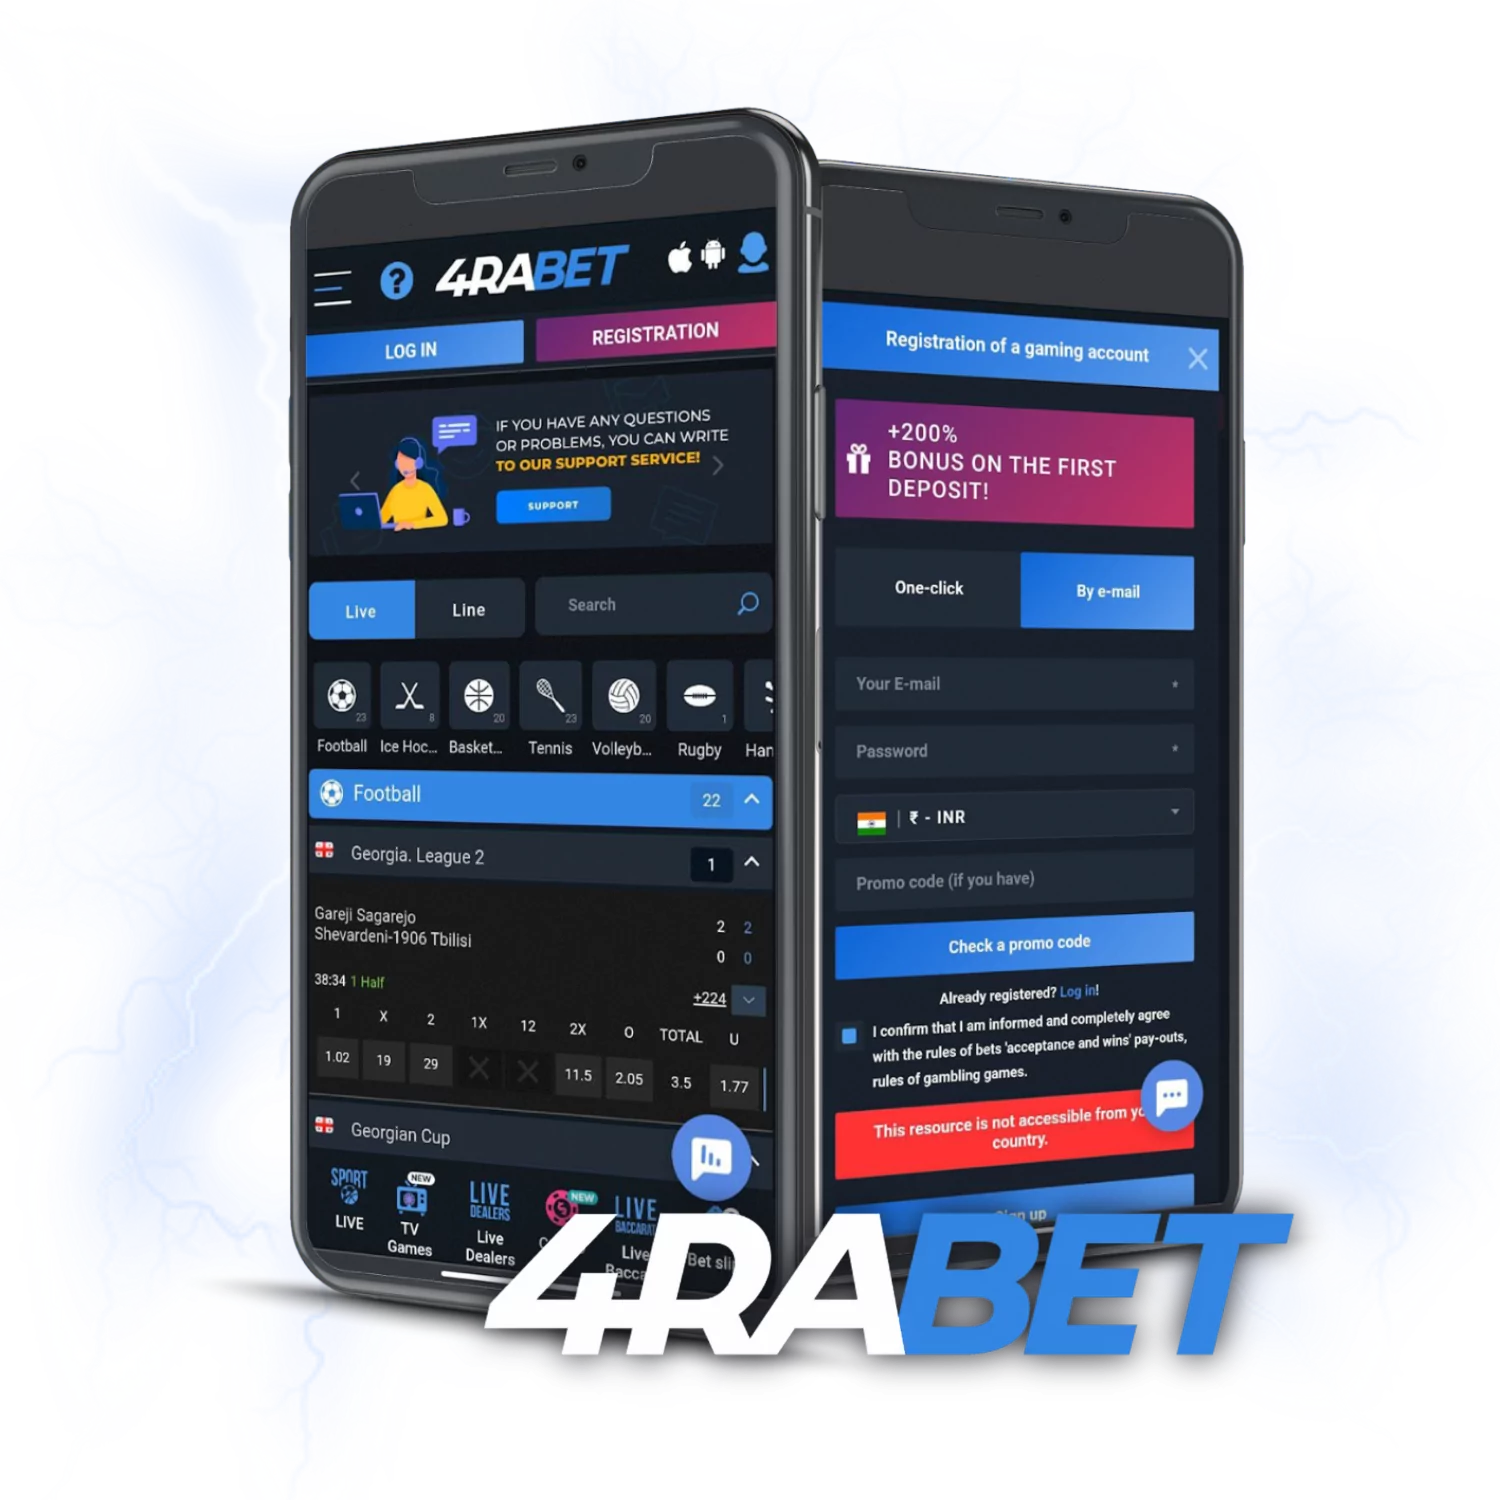 Install the app and bet at 4rabet whenever and wherever you want.